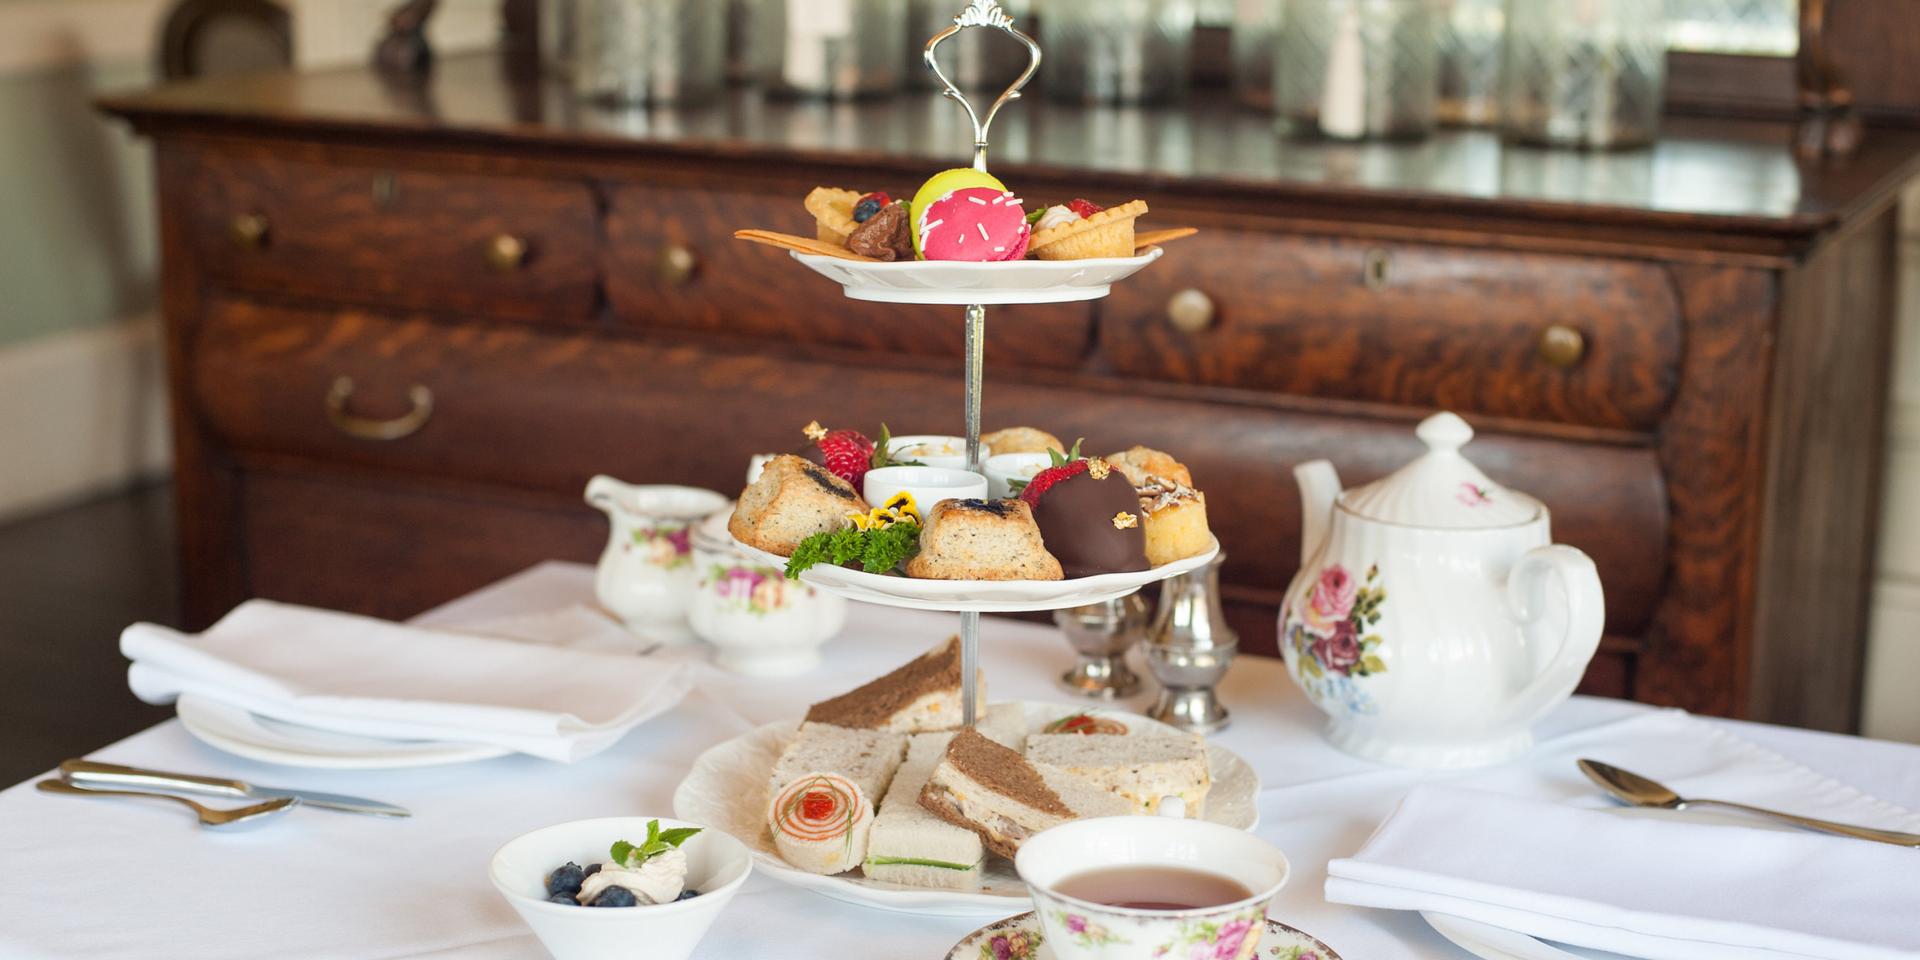 Afternoon tea at the Pendray Tea House